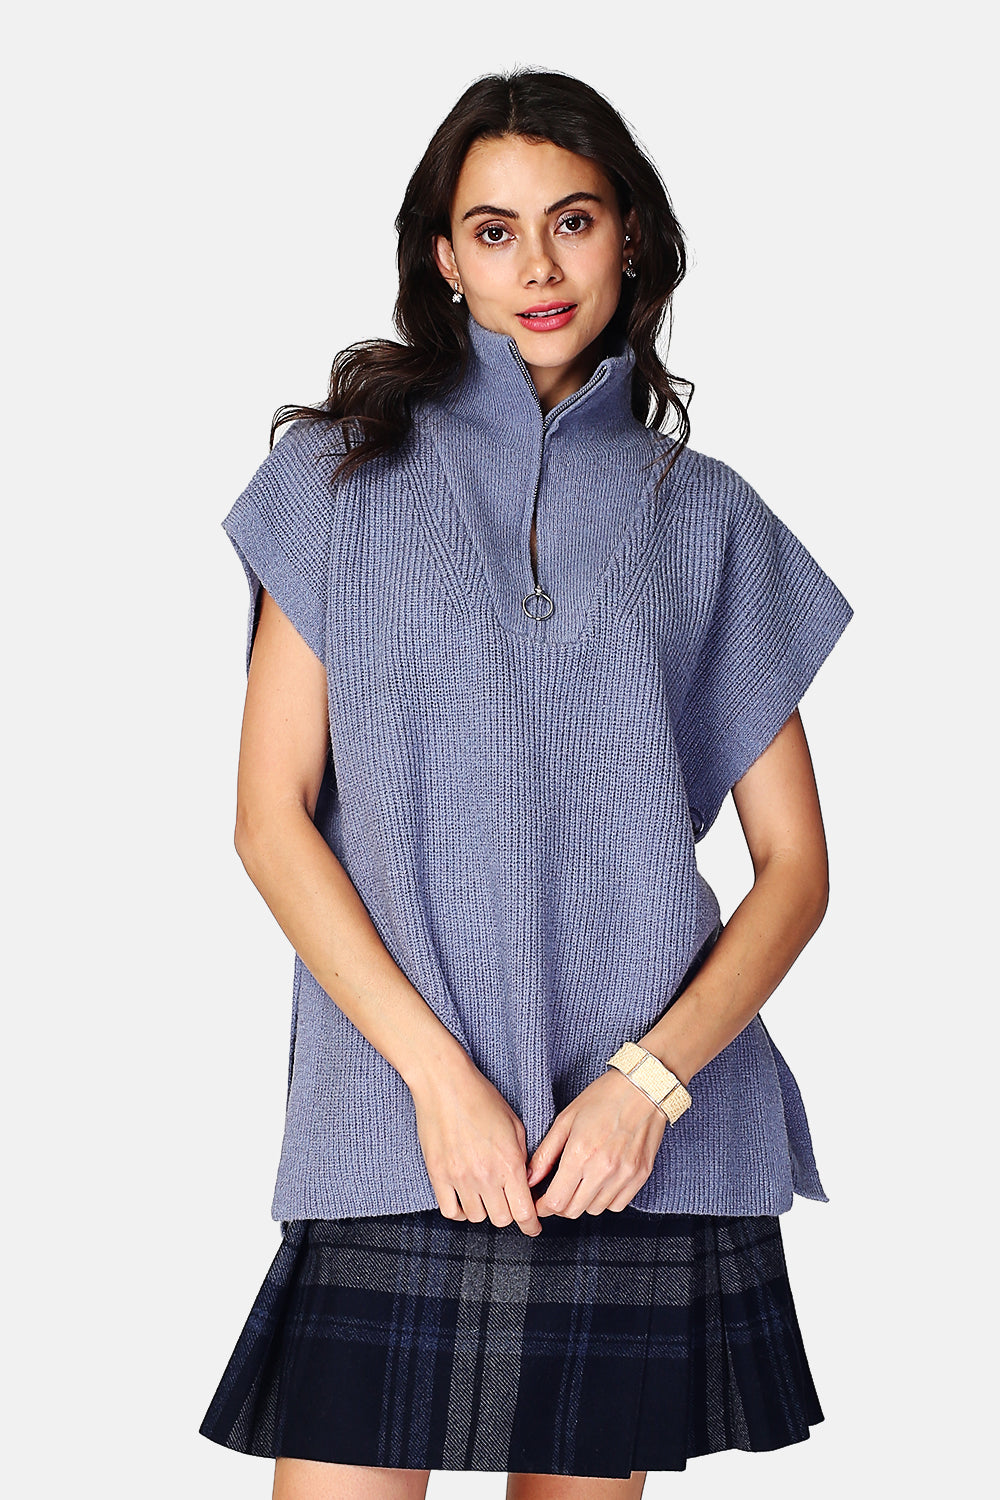 High neck poncho sweater closed with a zip, fancy knit